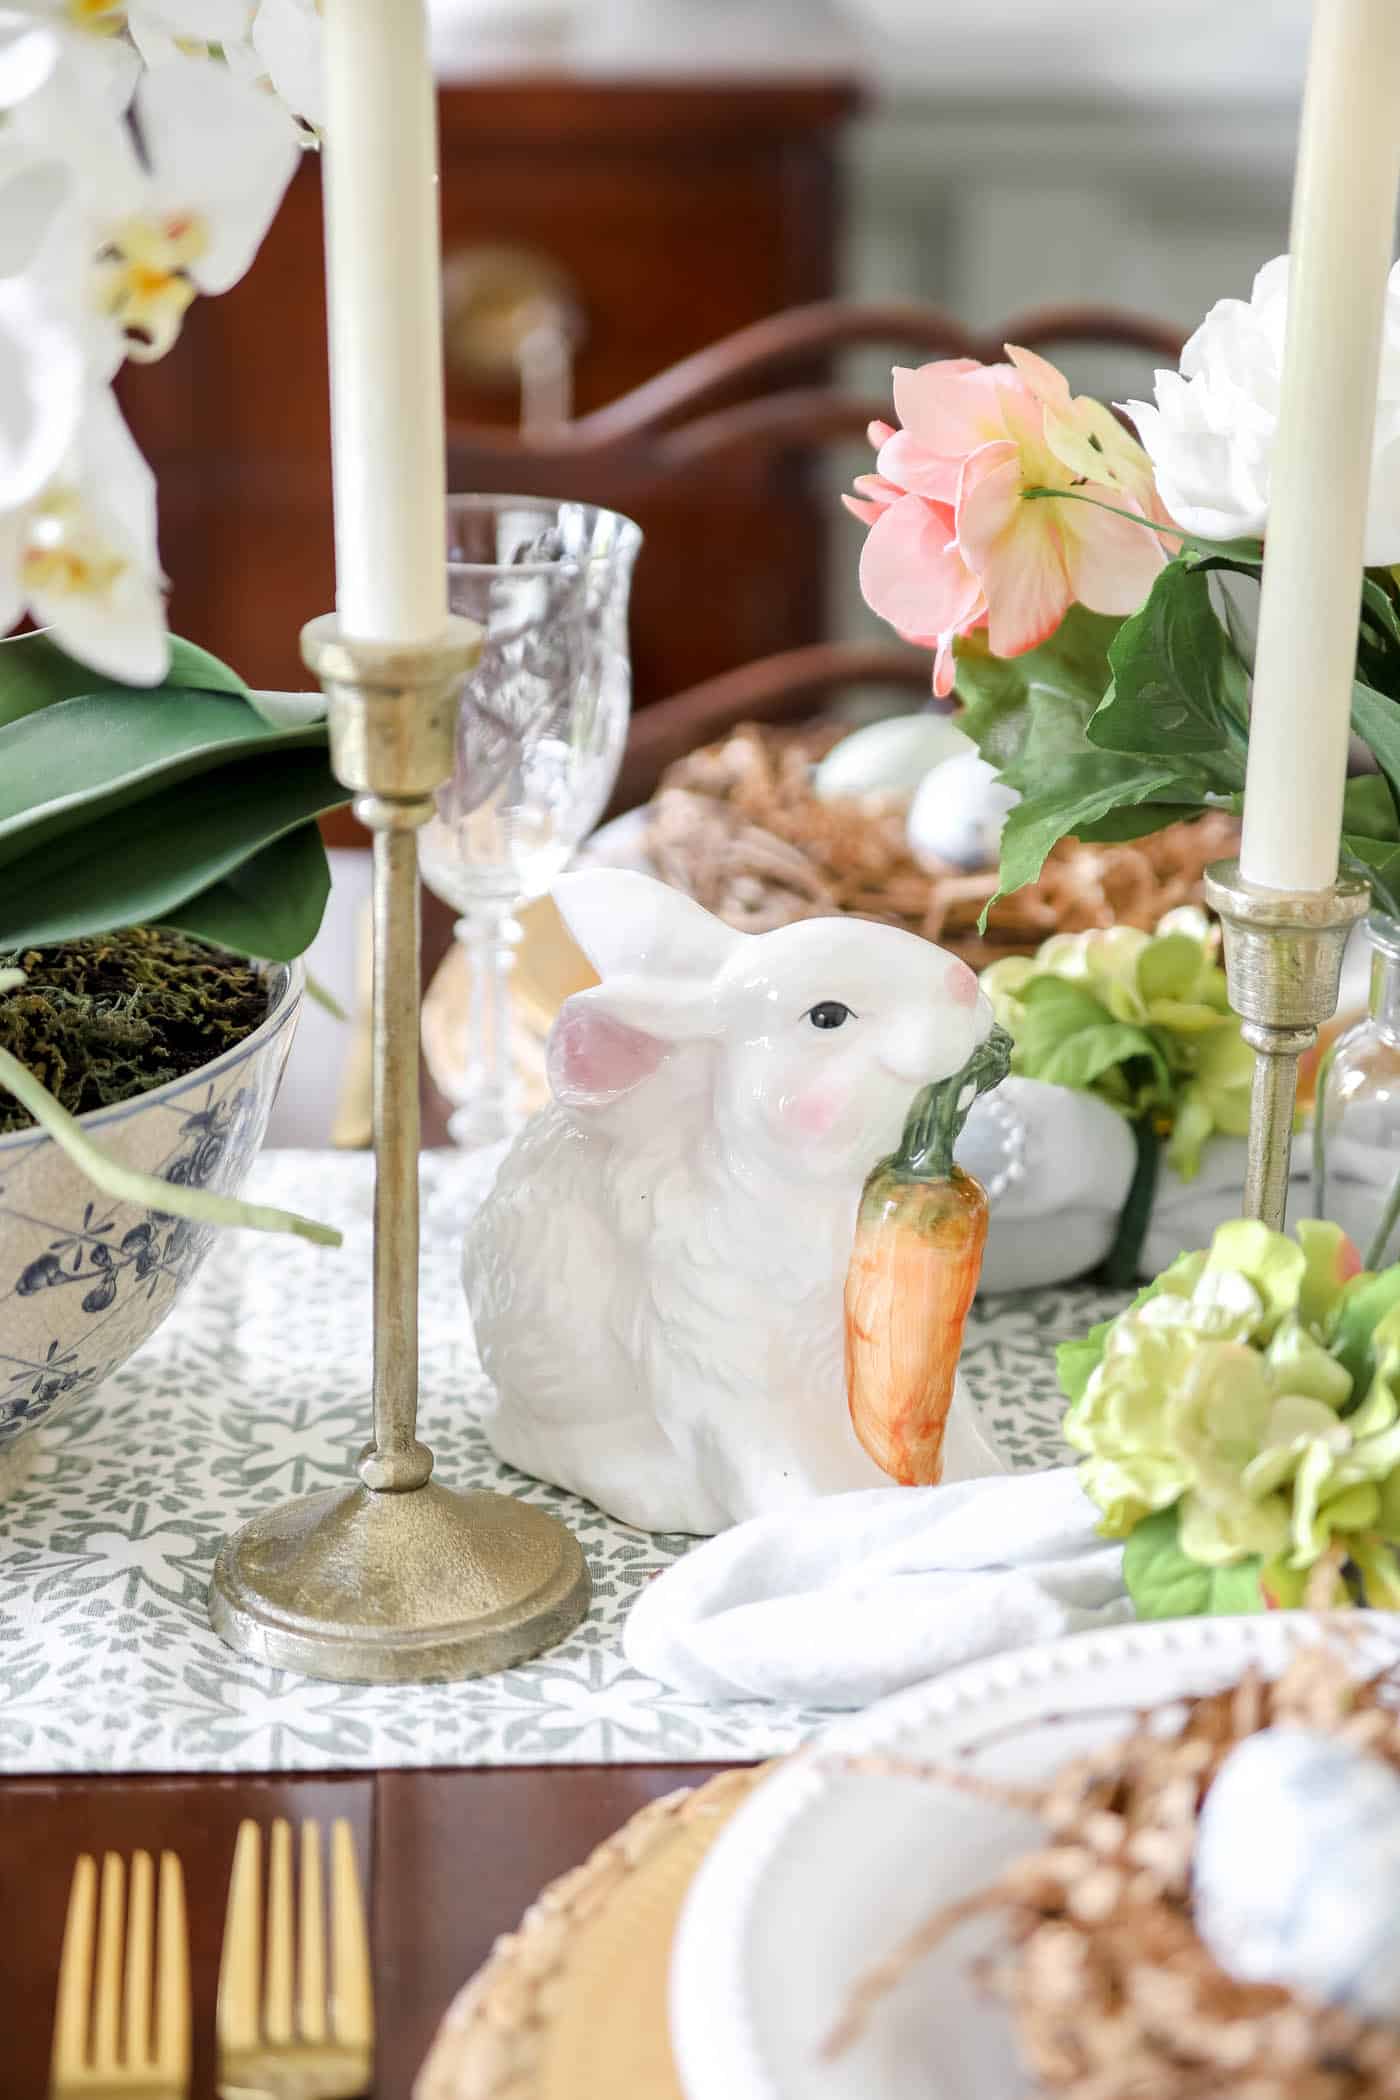 Ceramic bunny on the spring table